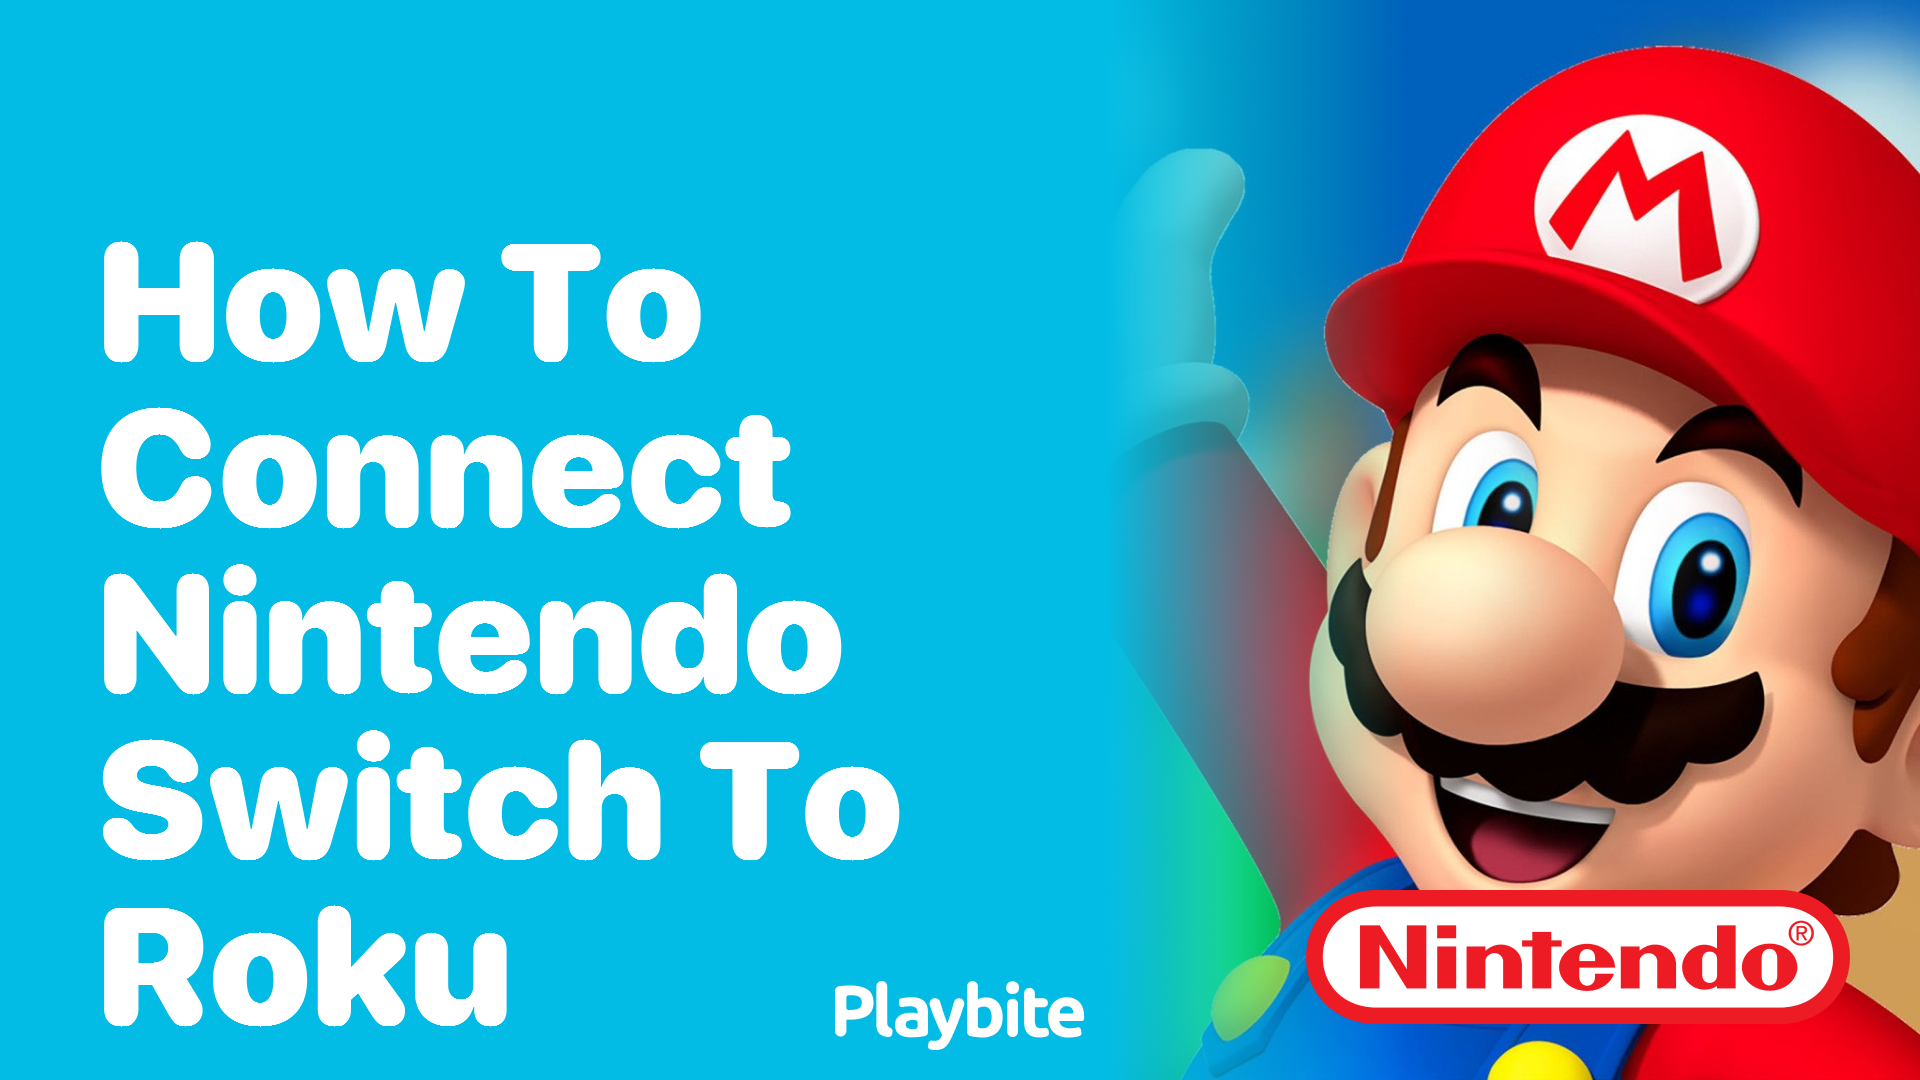 How to Connect Nintendo Switch to Roku TV - Playbite